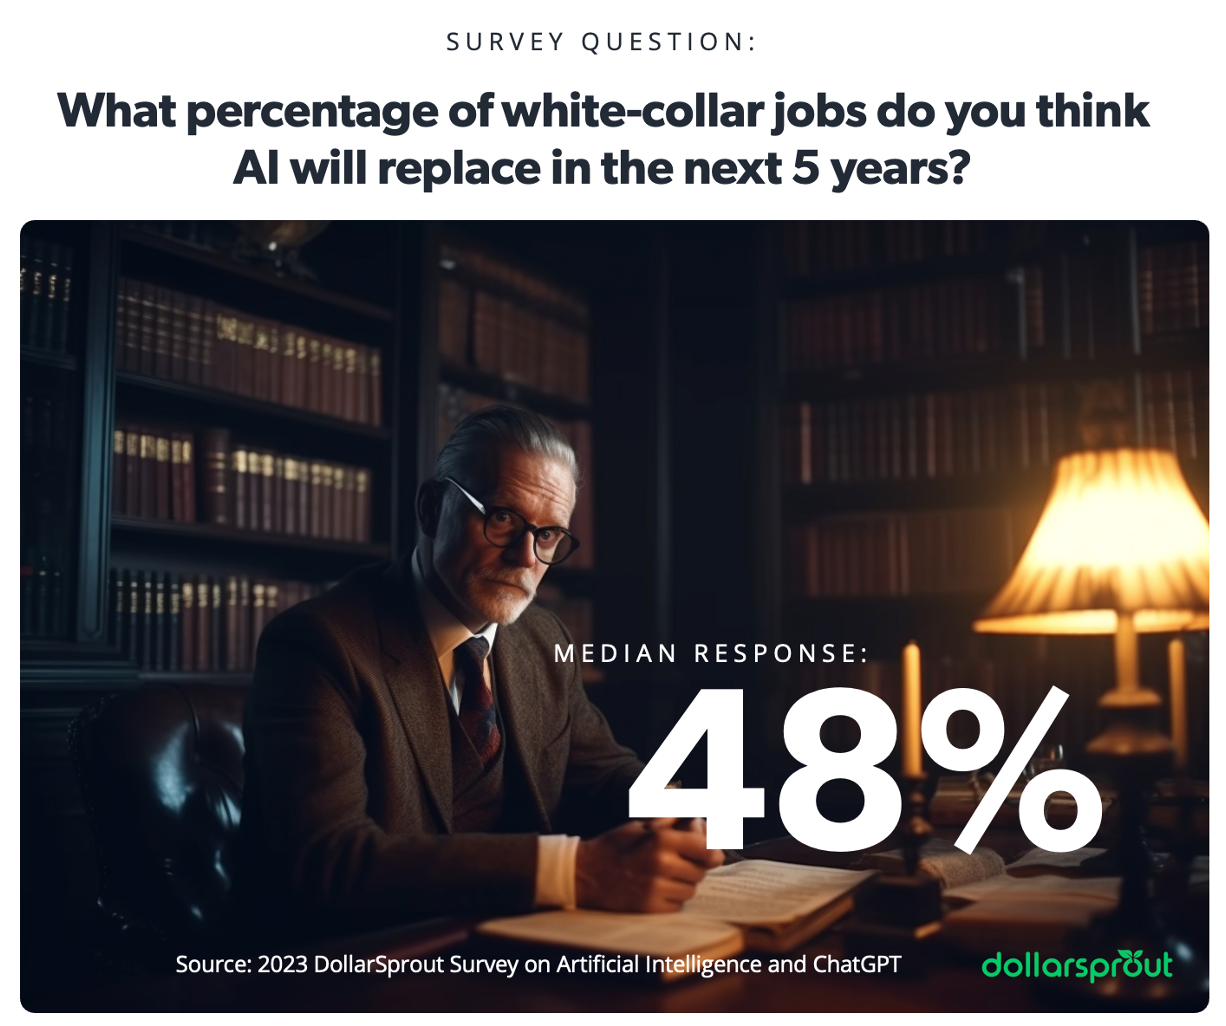 Graphic showing that the median response was 48% to the question: "What percentage of white collar jobs do you think AI will replace in the next five years?"